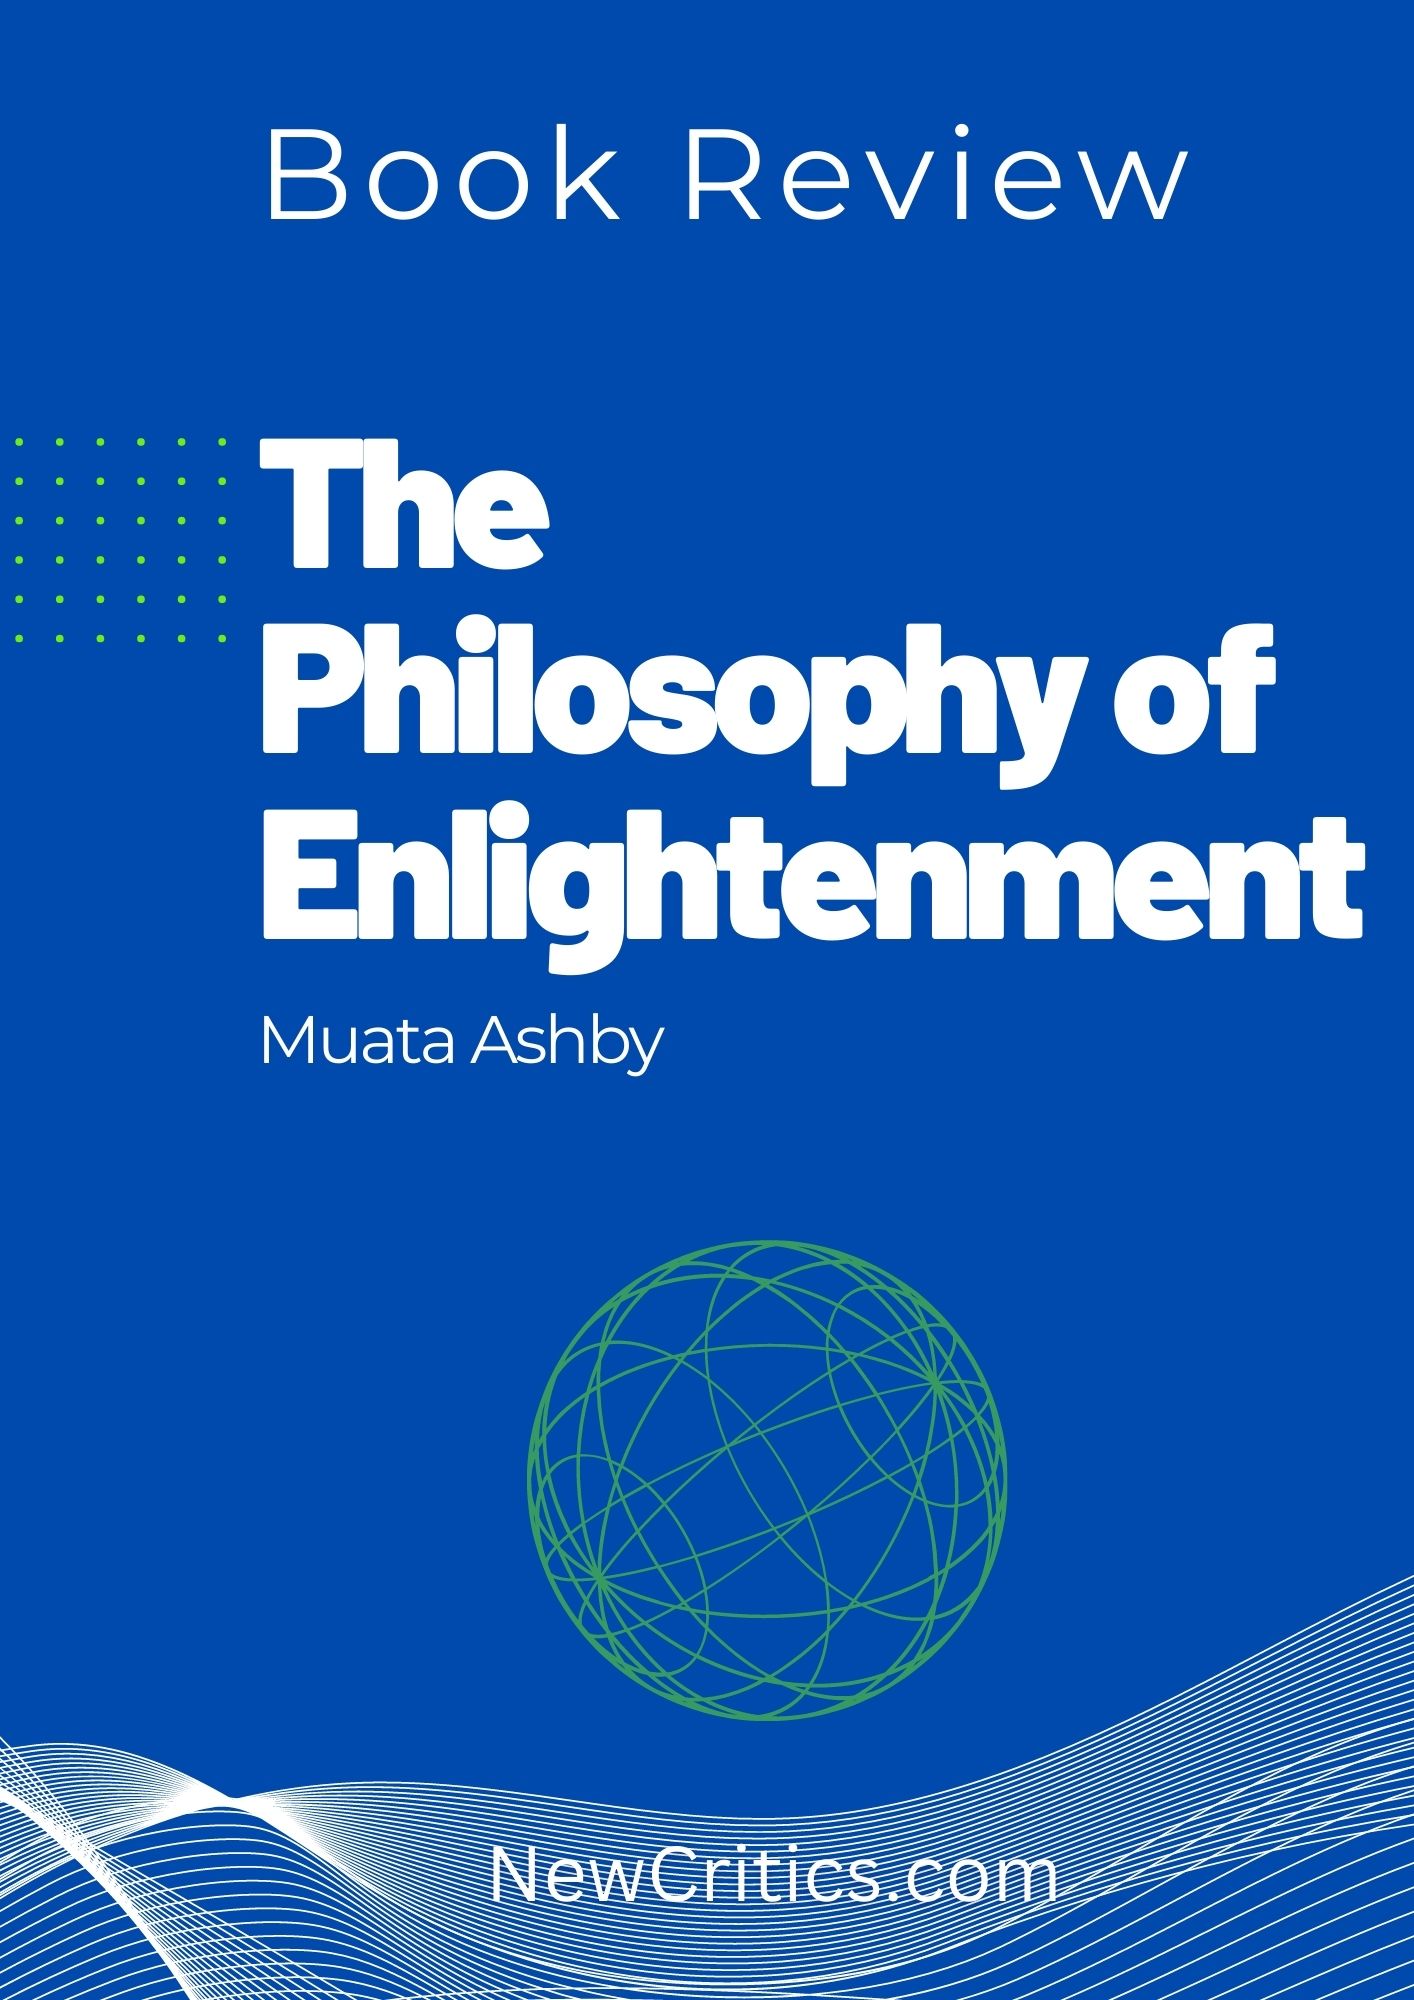 The Philosophy of Enlightenment Muata Ashby / Canva